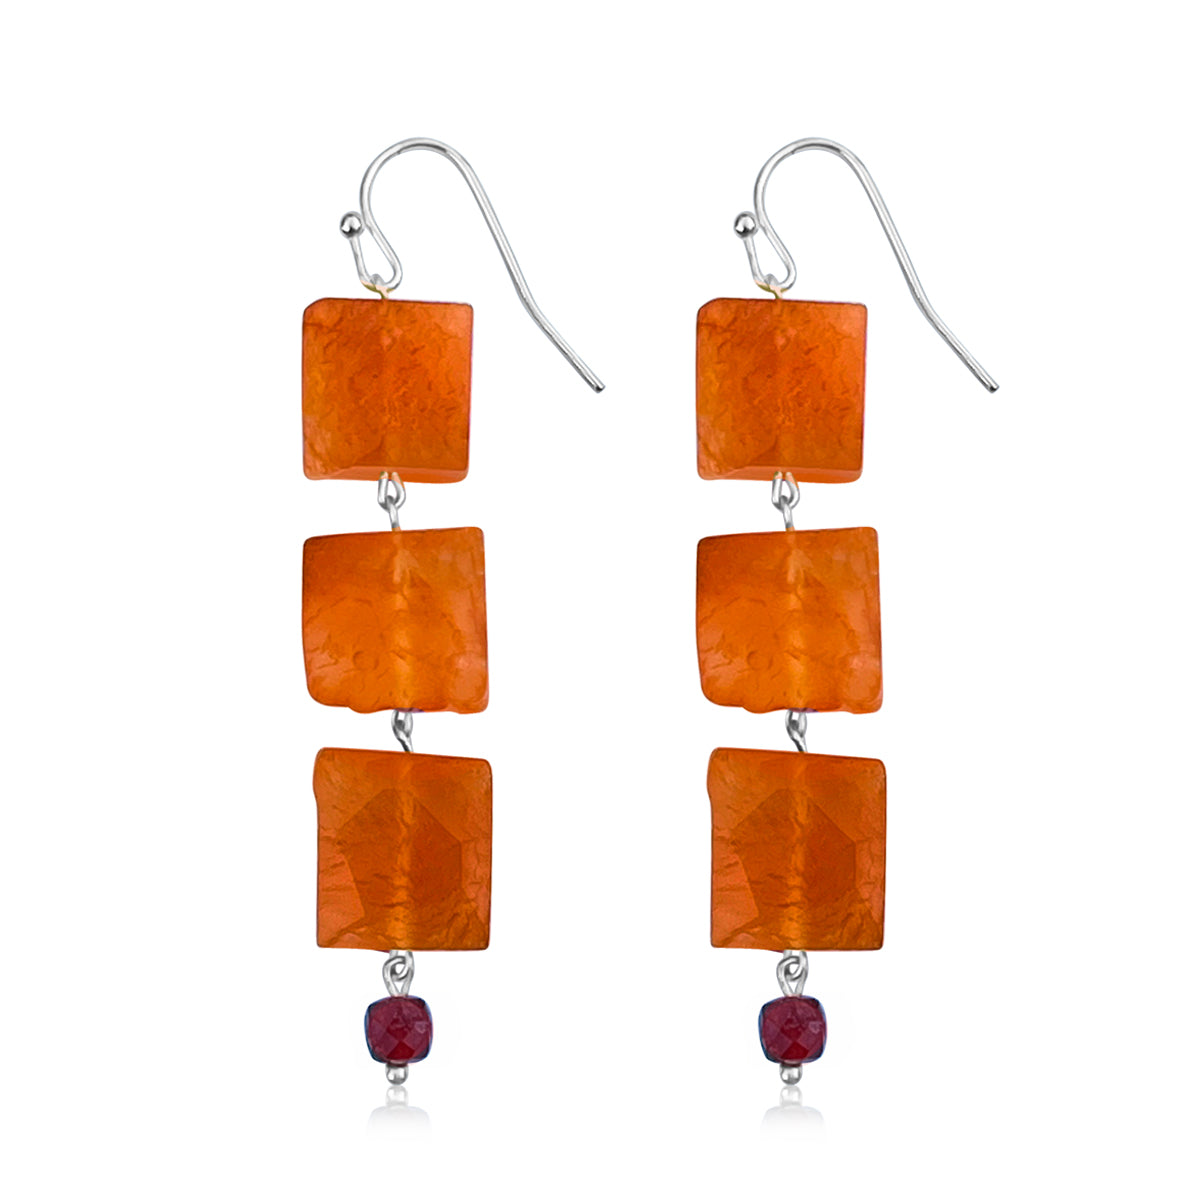 Prepare to embrace radiant confidence with our "Colorful Confidence - Carnelian Earrings." These are not just earrings; they're a spirited fusion of vibrancy, boldness, and the dynamic energy of Carnelian gemstones.